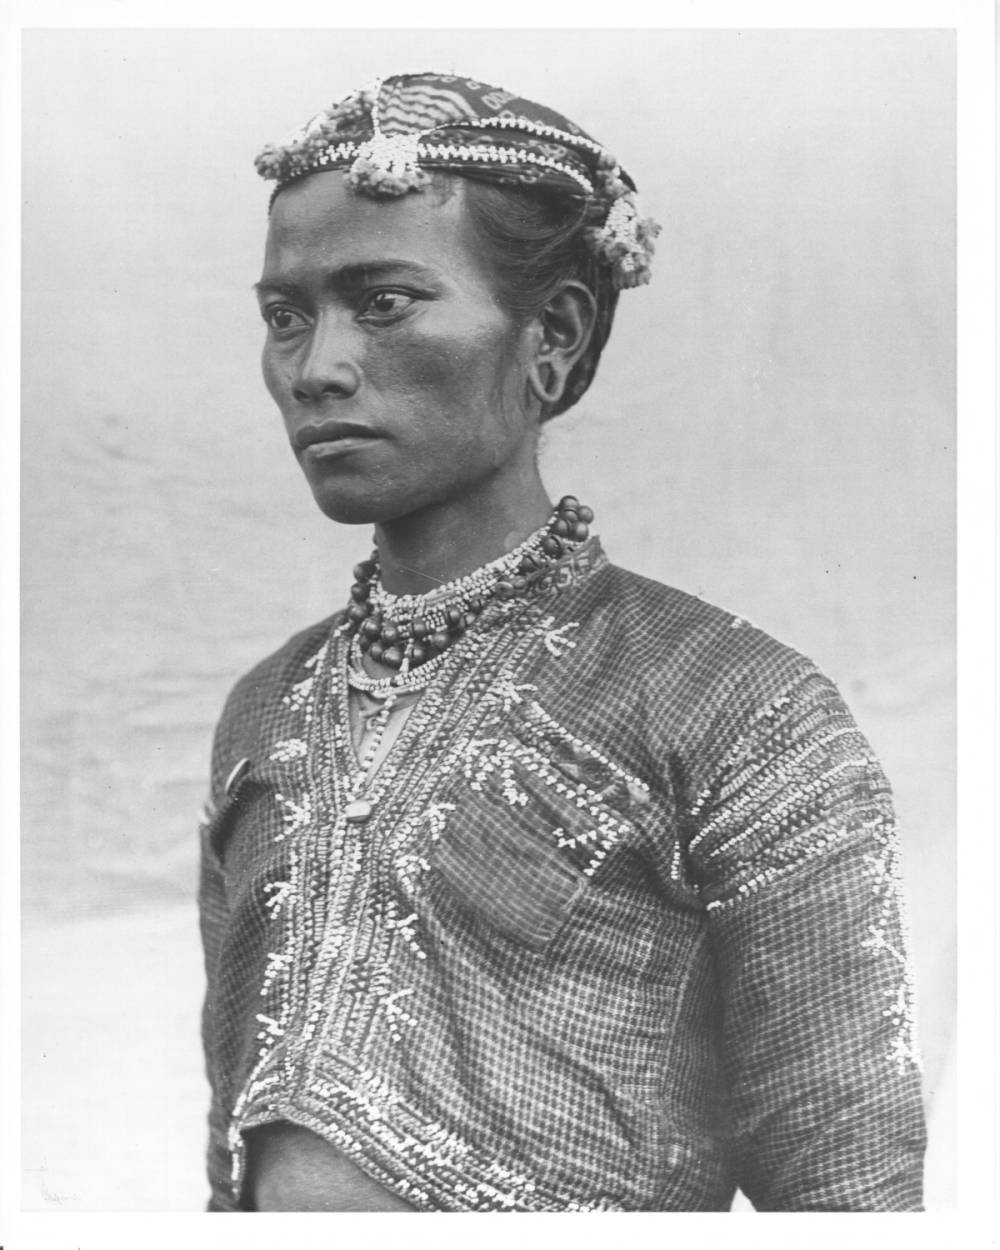 <p>Portrait photograph of Bagobo man in traditional dress. Headhunter: Head hunting is the Bagabos highest pursuit. The tribe rates men by the number of heads they get. Their knives are 20 inches long. Number 940: The number ‘940’ is written at the lower left-hand corner of the photograph.</p>
